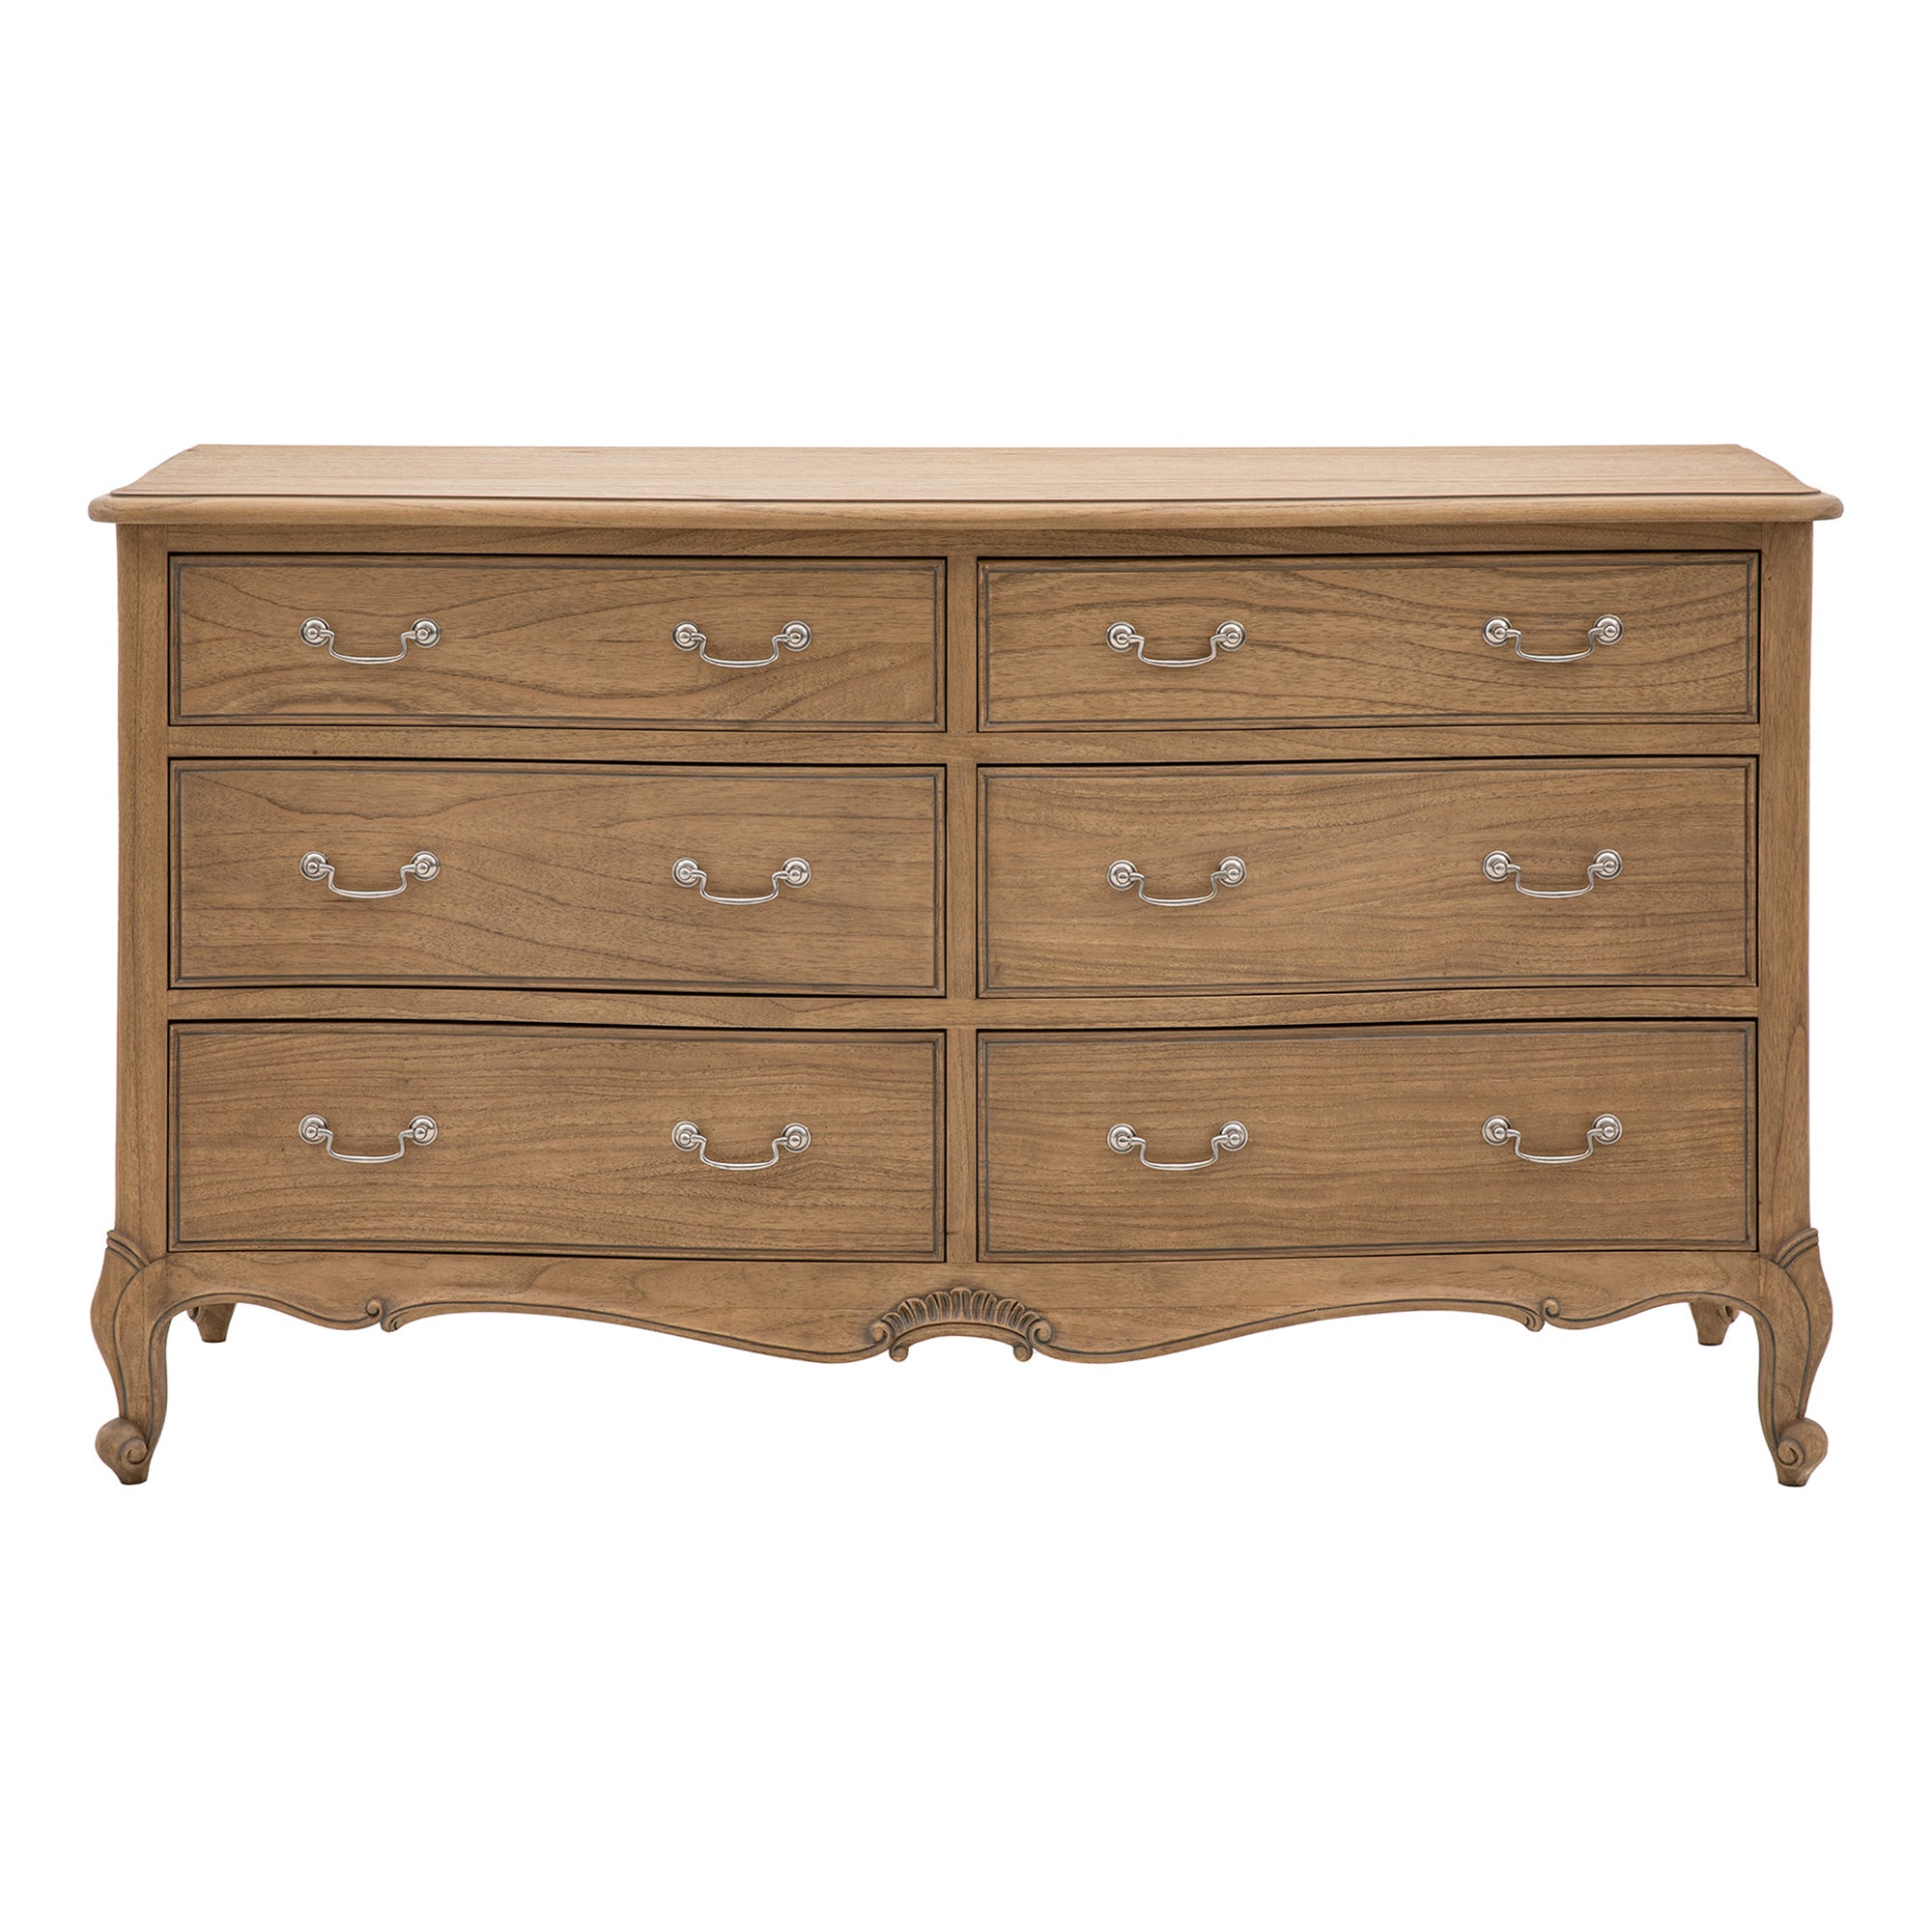 French Chic Wooden Wide Chest of Drawers